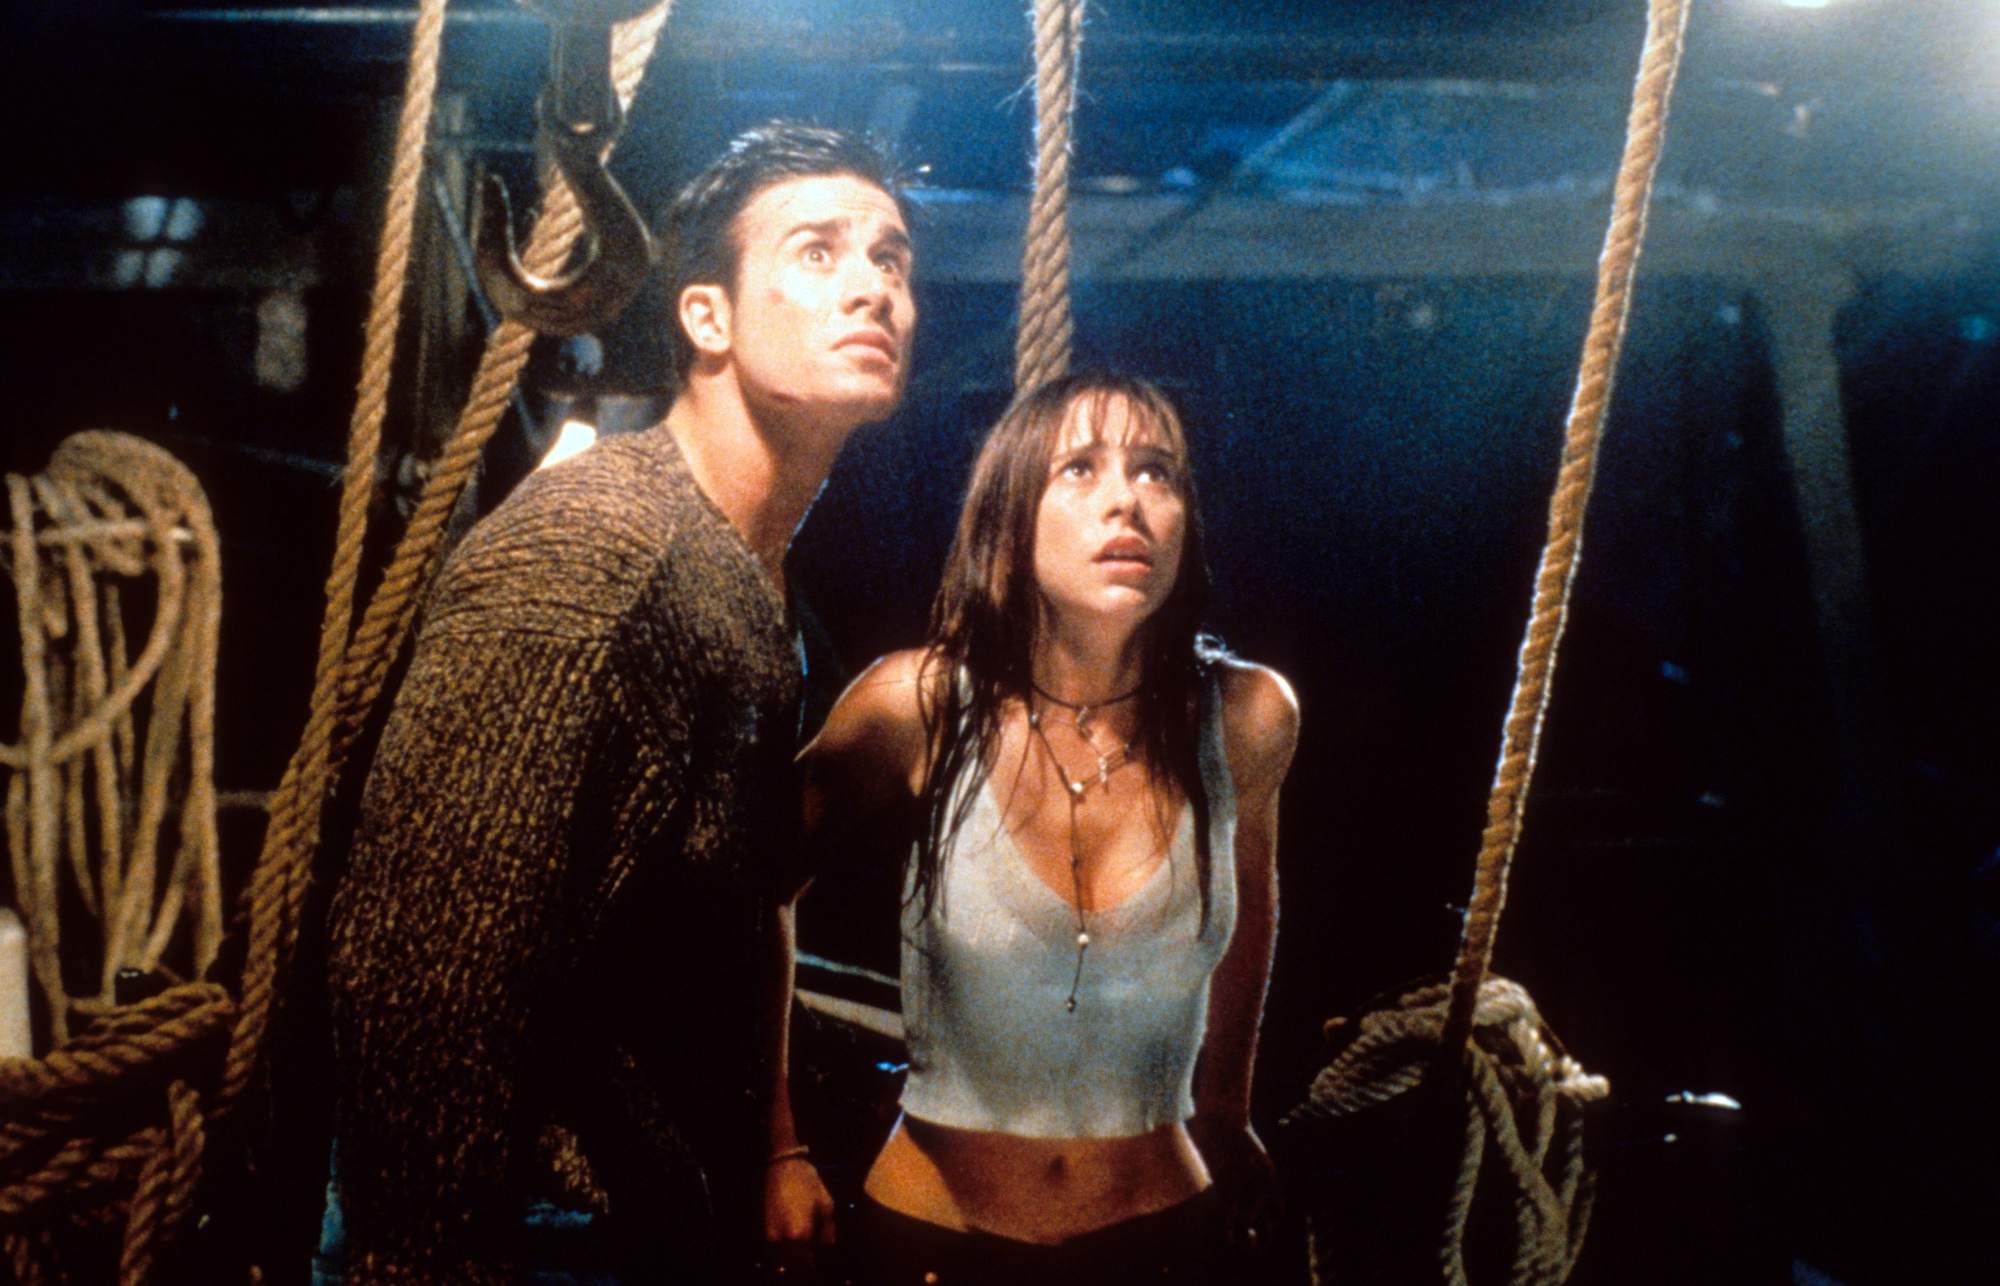 'I Know What You Did Last Summer' Freddie Prinze Jr. as Ray Bronson and Jennifer Love Hewitt as Julie James looking shocked while looking up with ropes behind them.